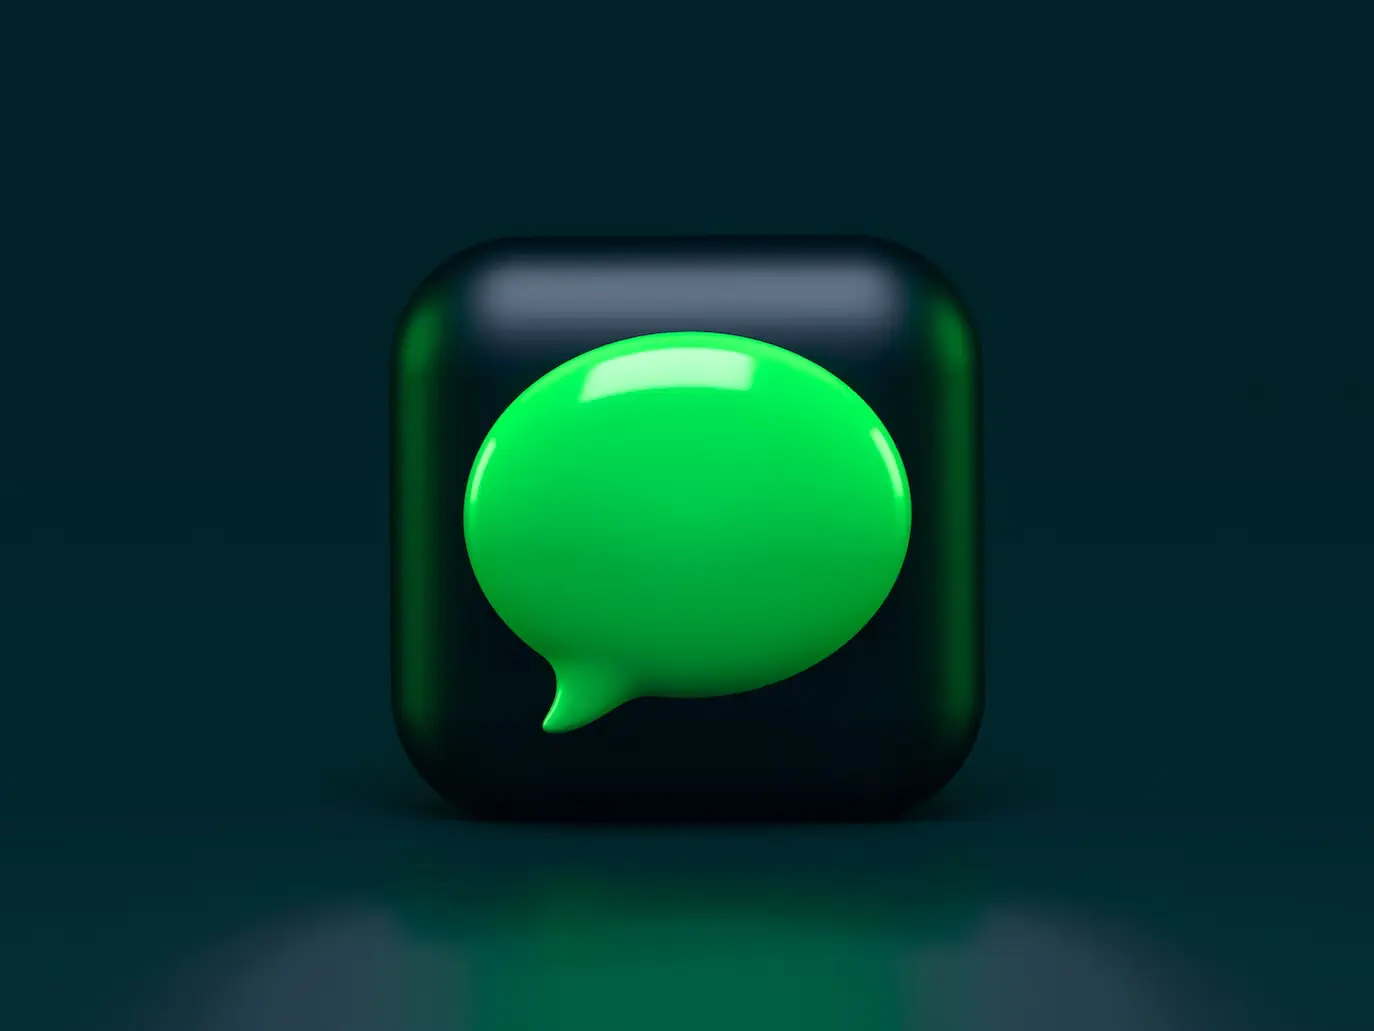 Chatbot or live chat: Big green messaging bubble